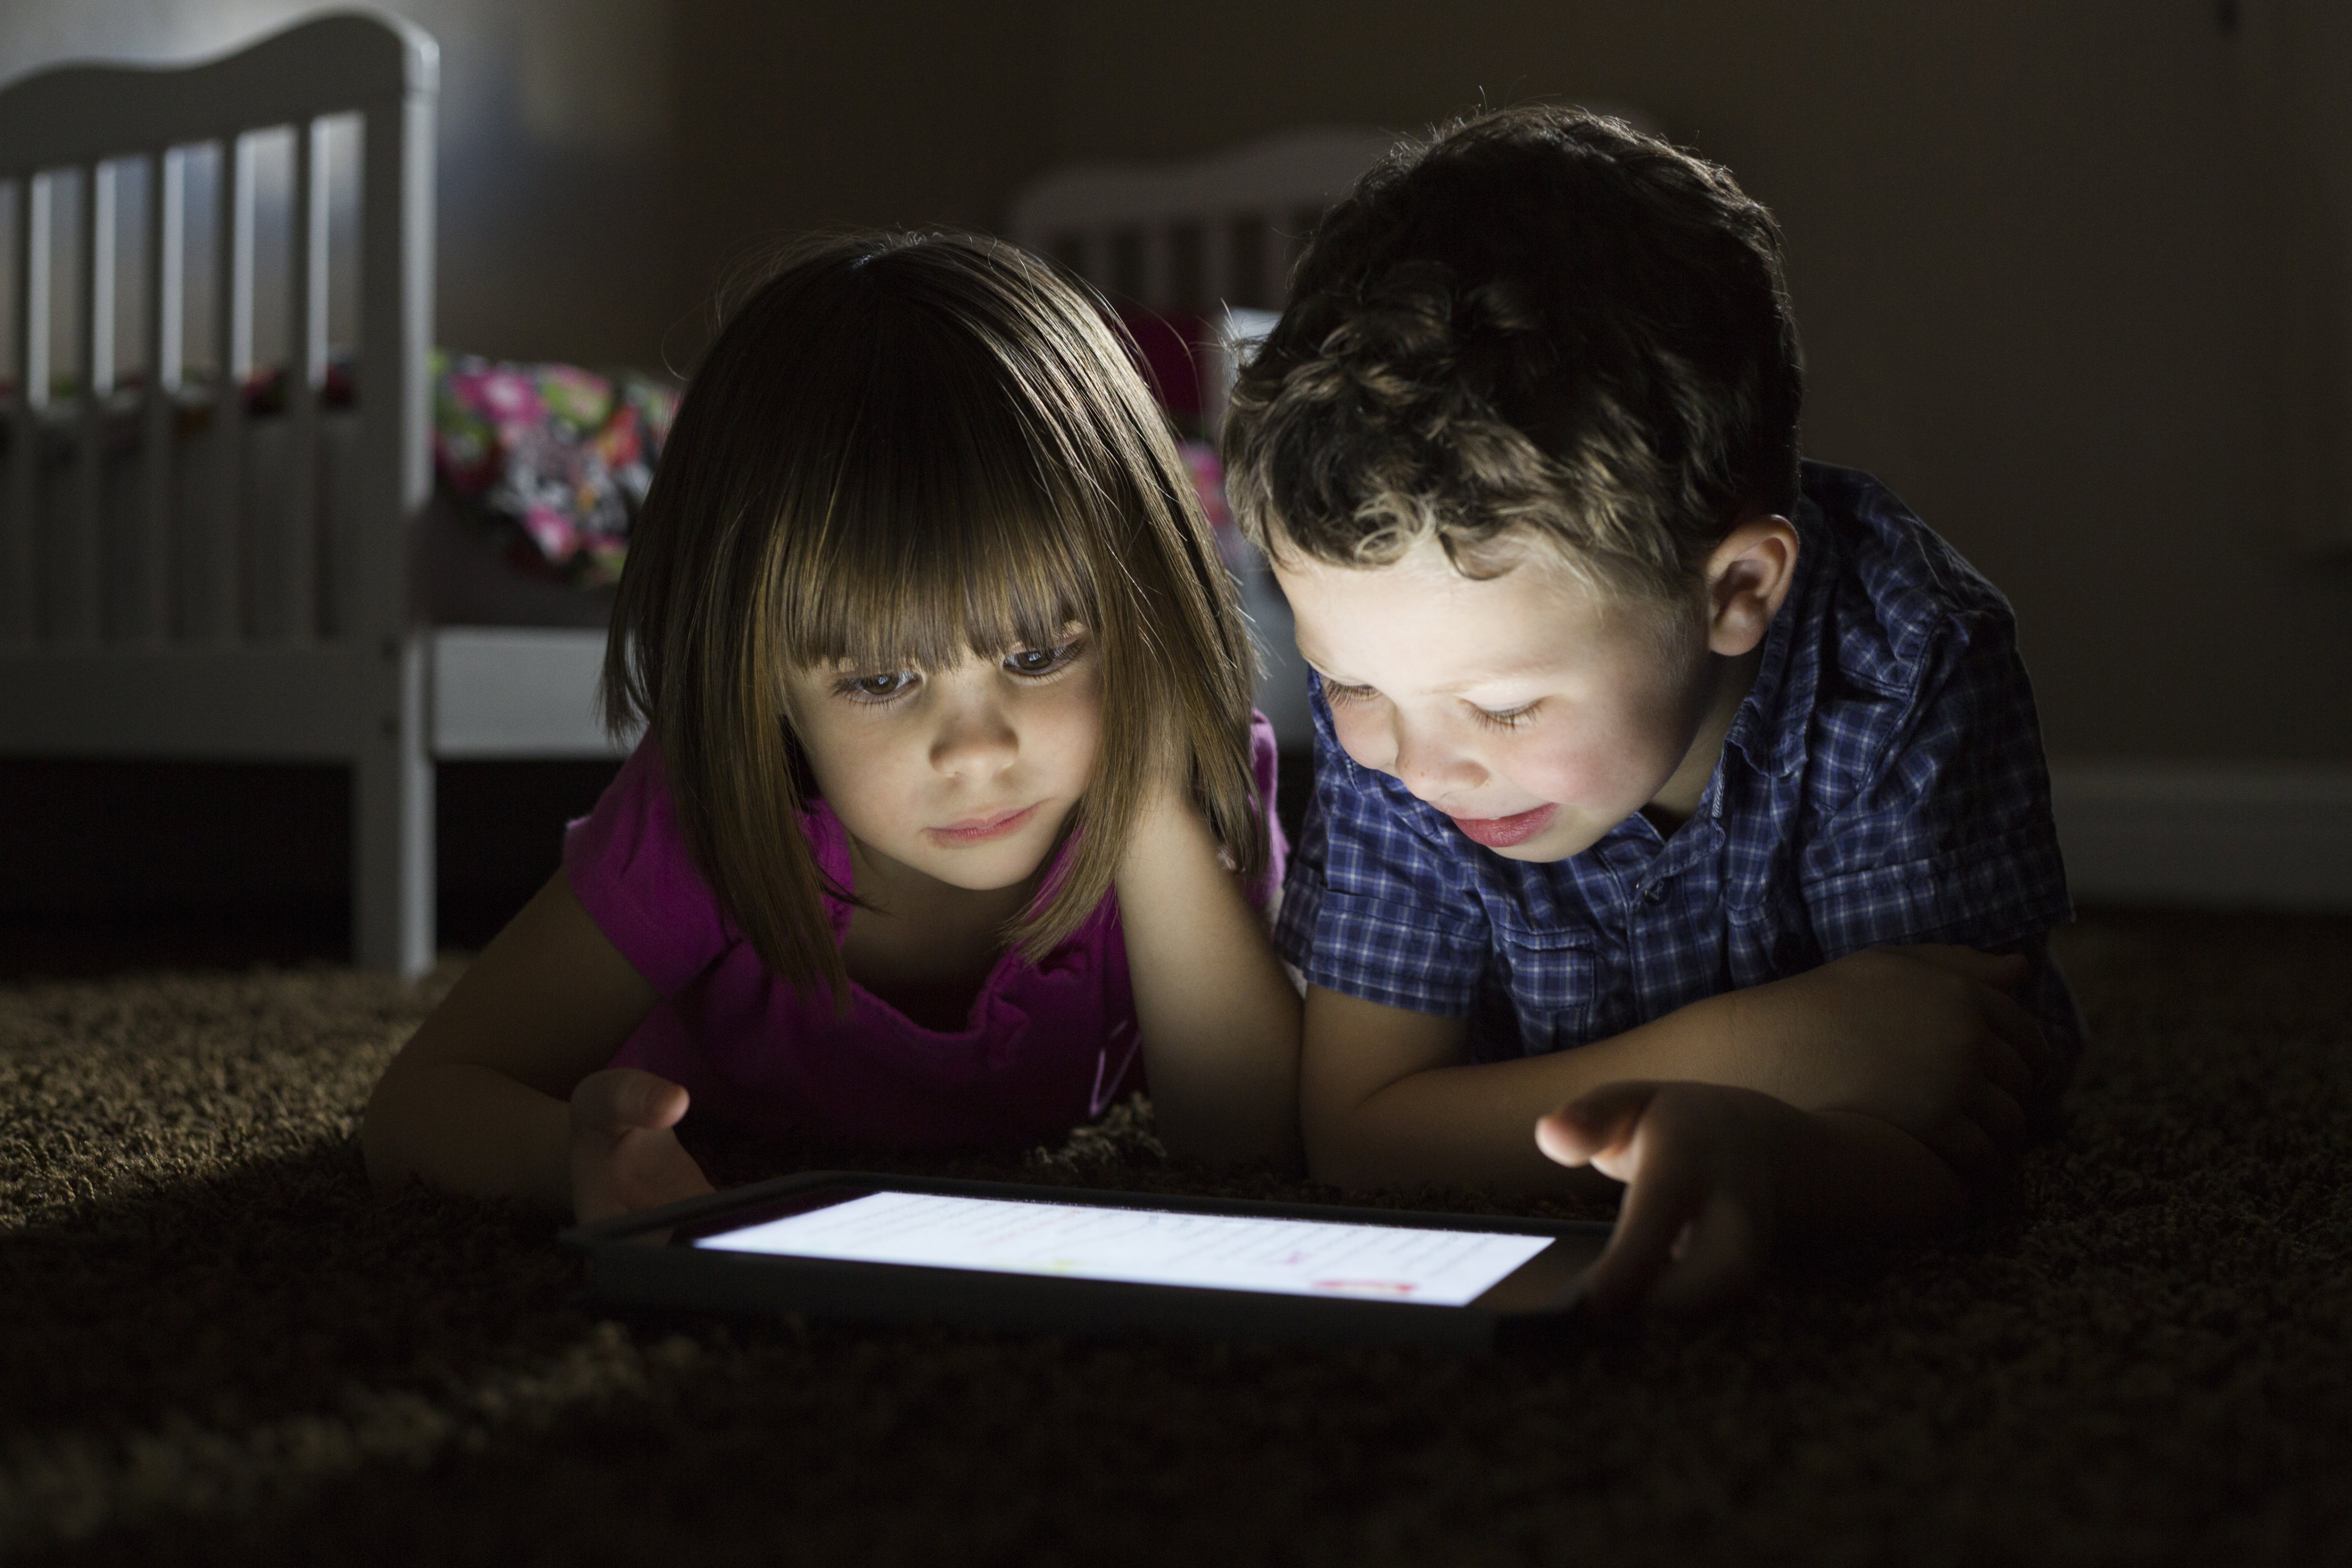 Children using a tablet. (Mike Kemp&mdash;Getty Images/Blend Images RM)